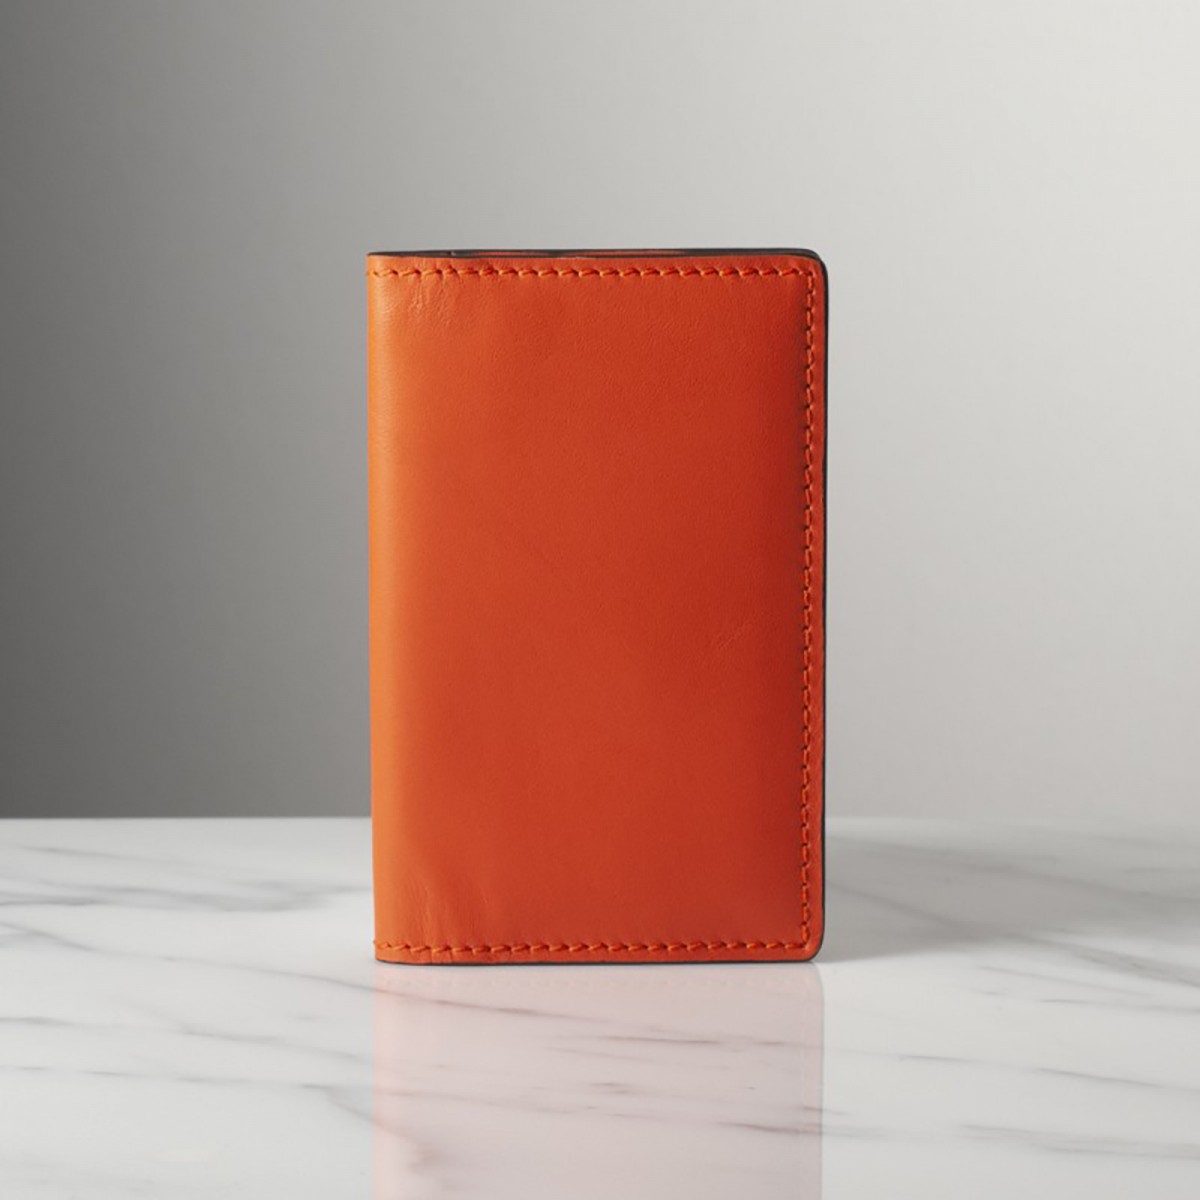 LORENZO - Handcrafted leather card holder made in Italy